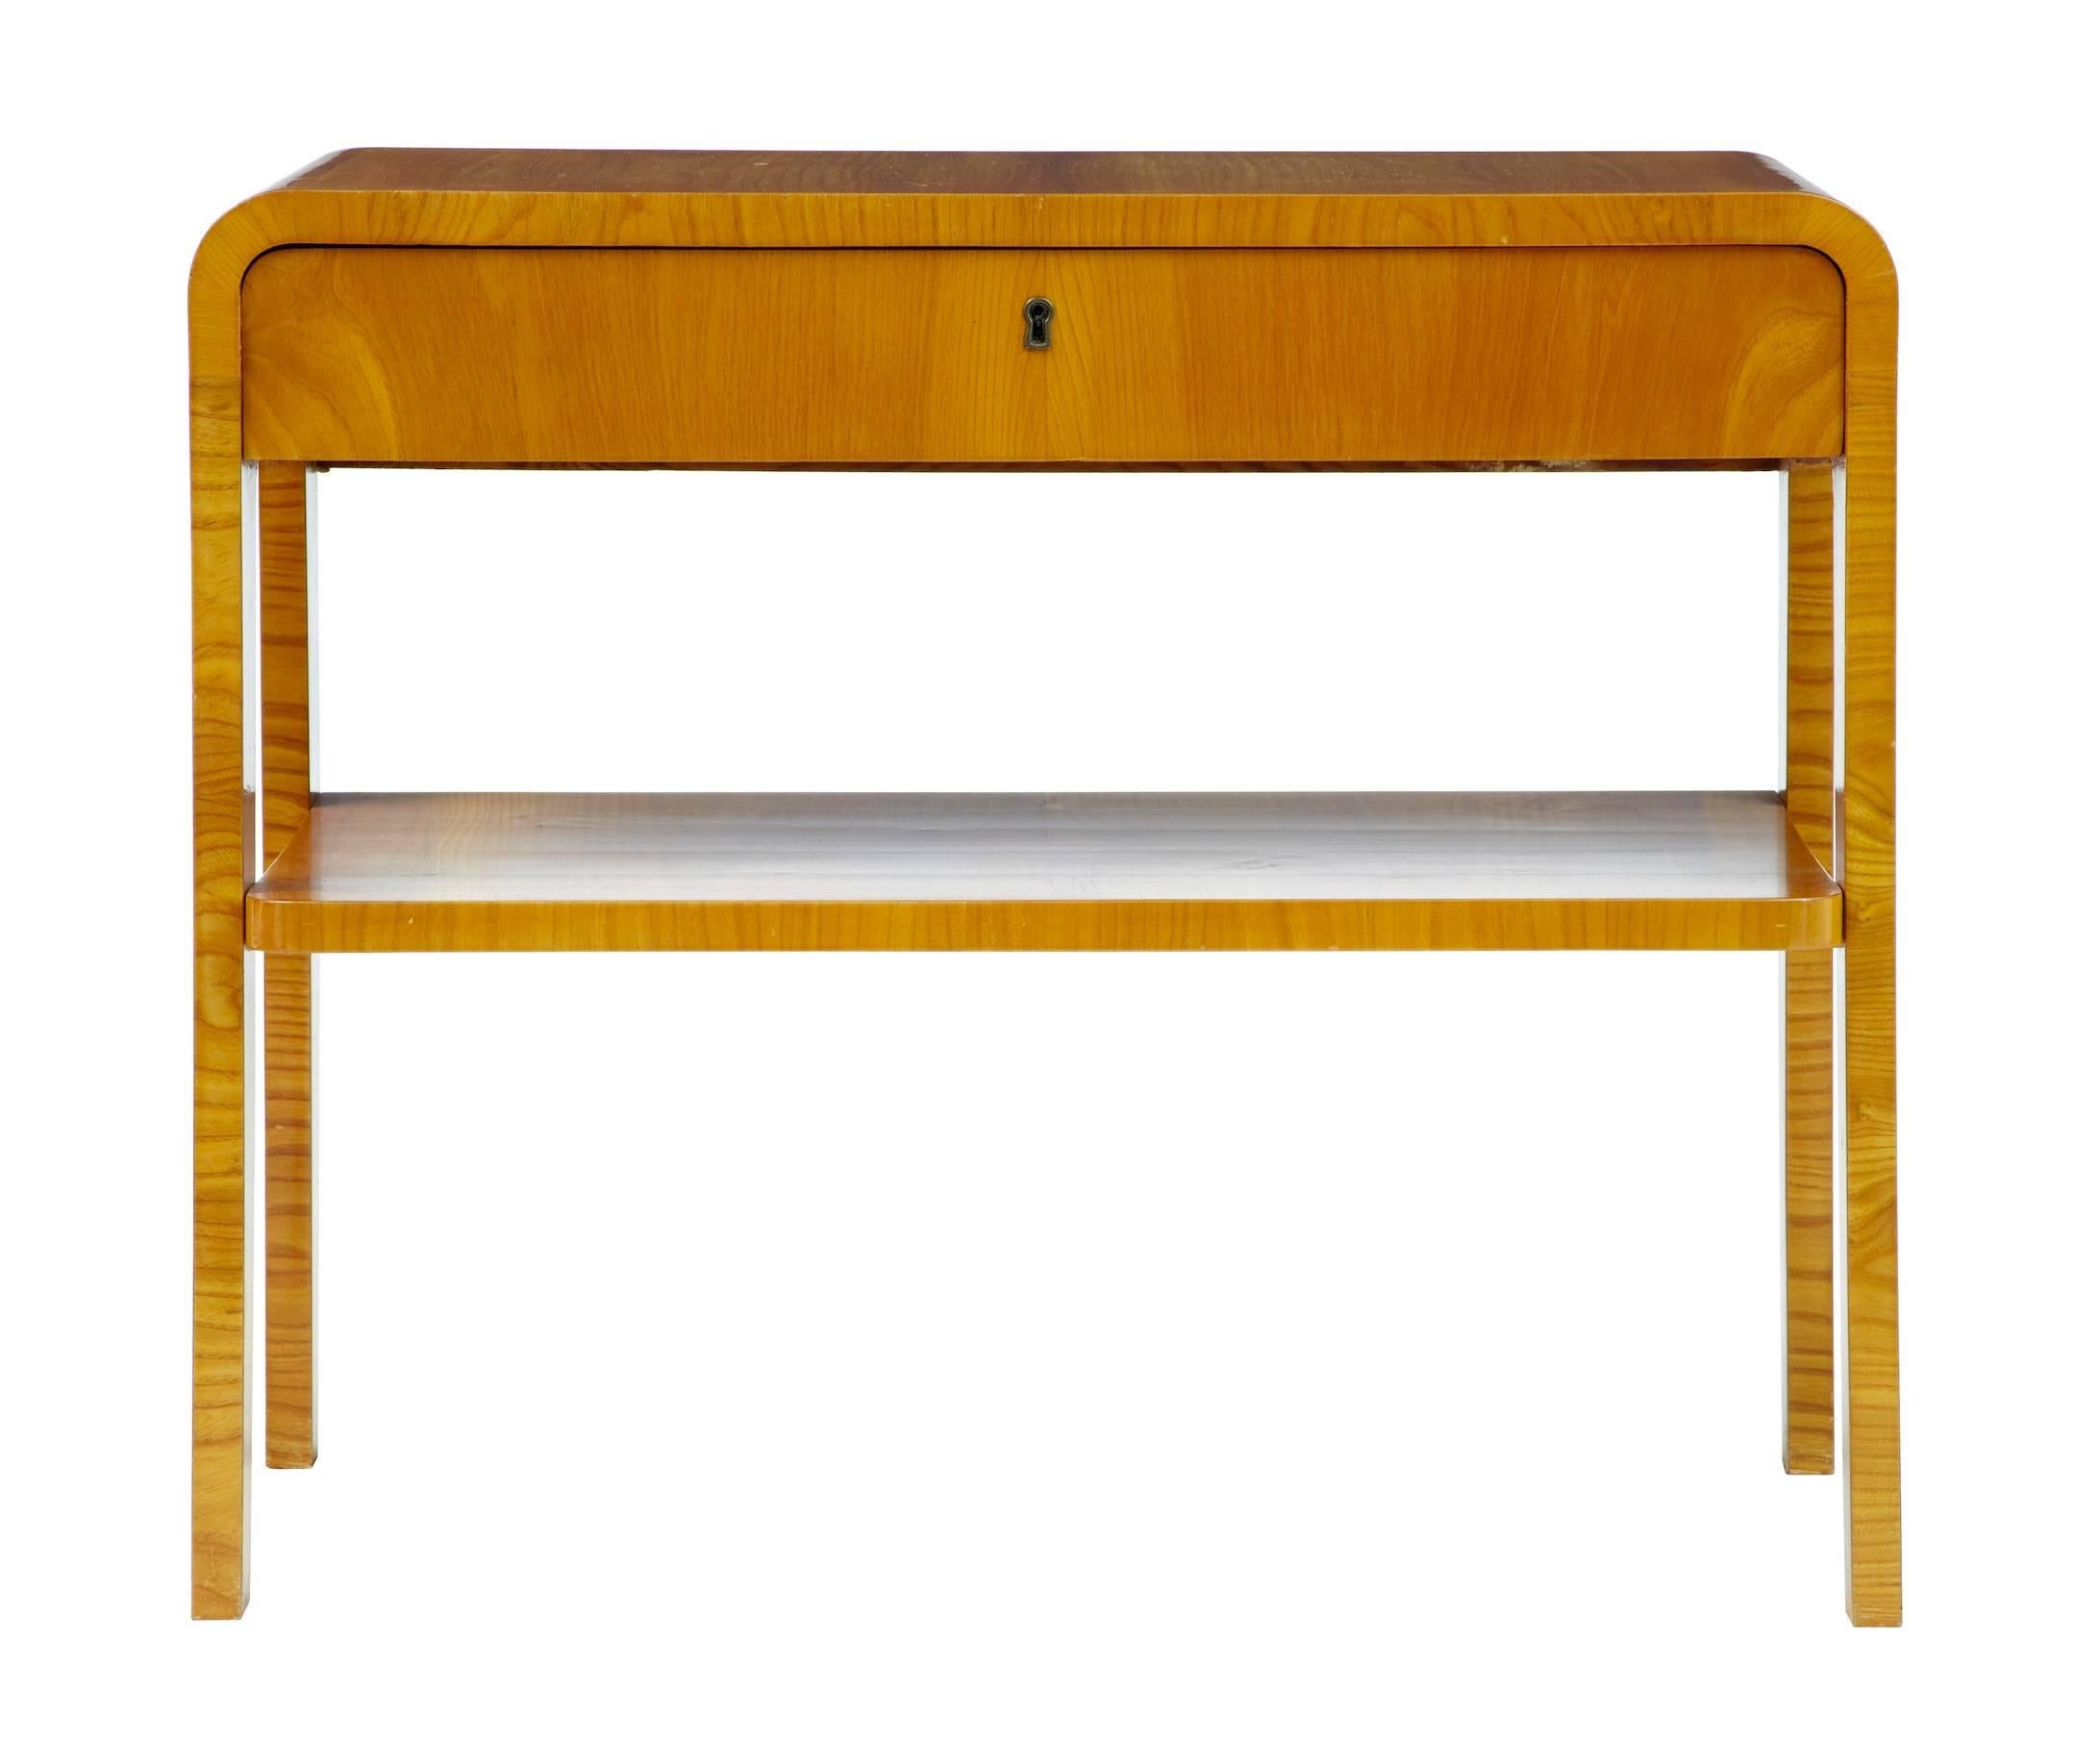 Fine piece of Scandinavian design in this multipurpose side table, circa 1950.
Flowing form made in good quality birch veneers.
Single drawer with single shelf below.
Measure:
Height 23 1/2